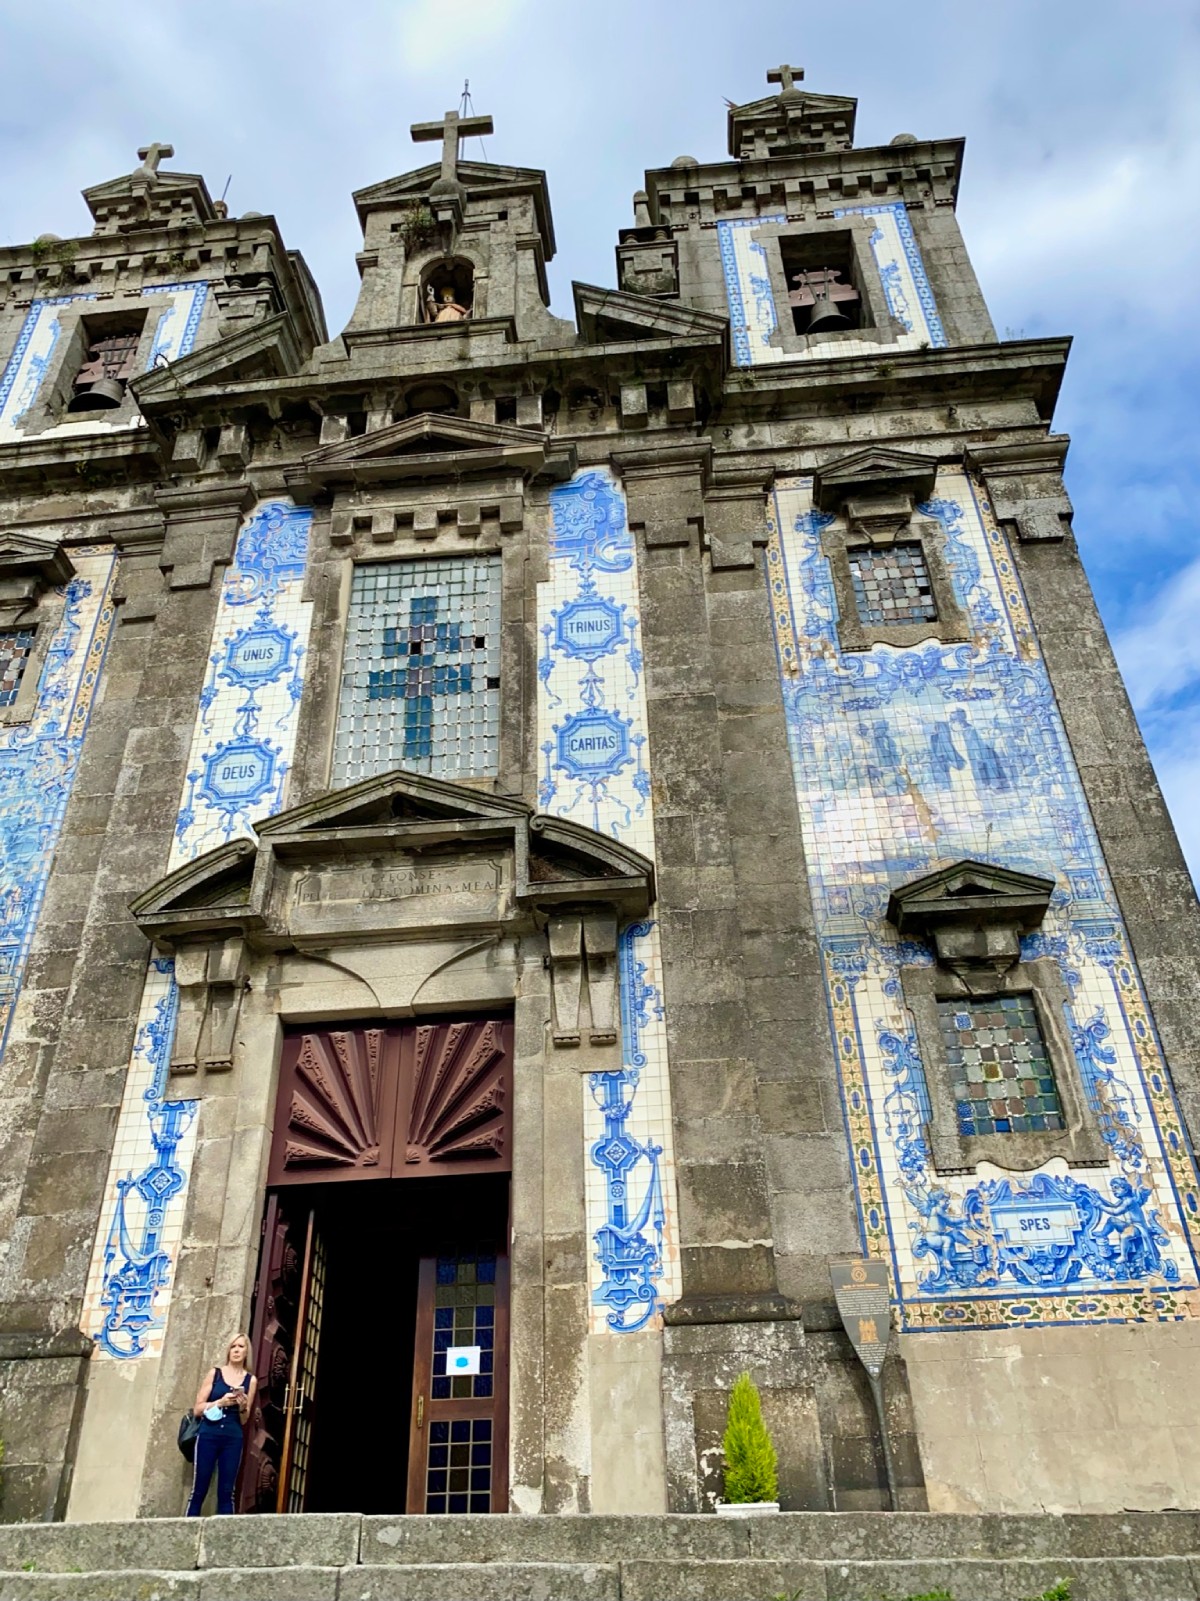 A travel guide for Porto - find all the amazing azulejo tiles